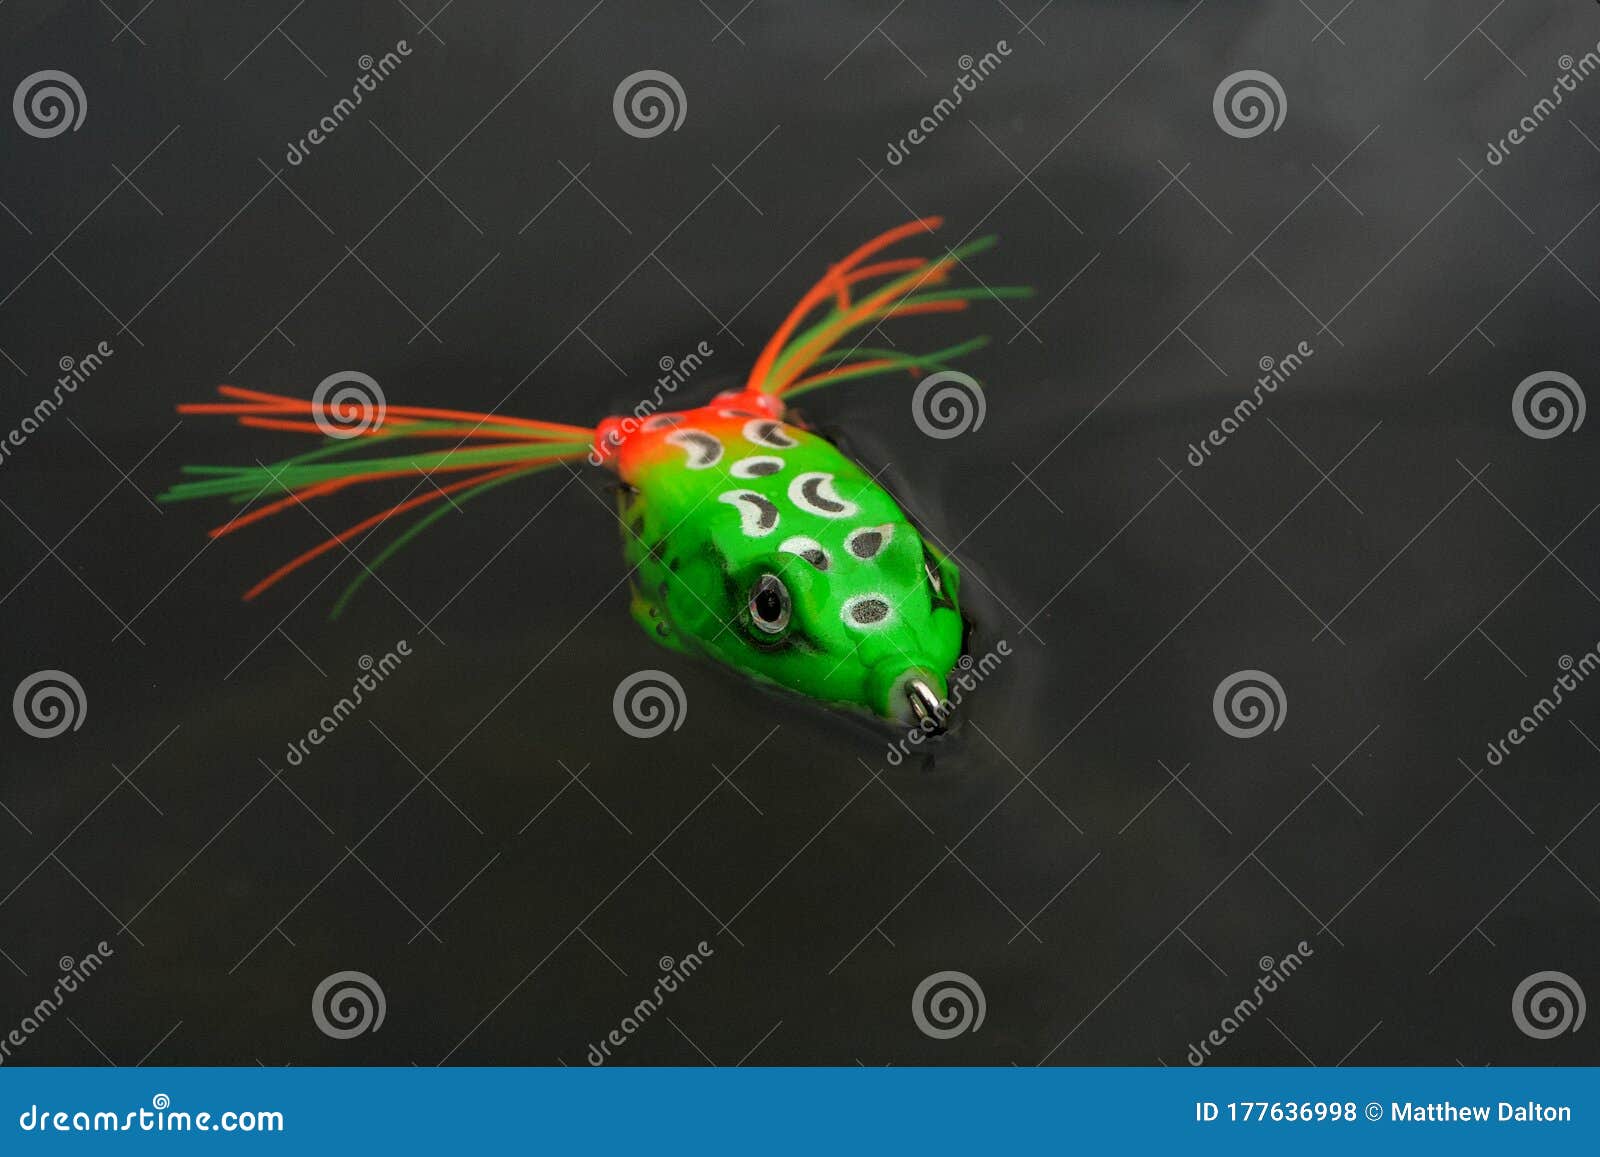 A Pike/bass Frog Fishing Lure. Stock Photo - Image of tackle